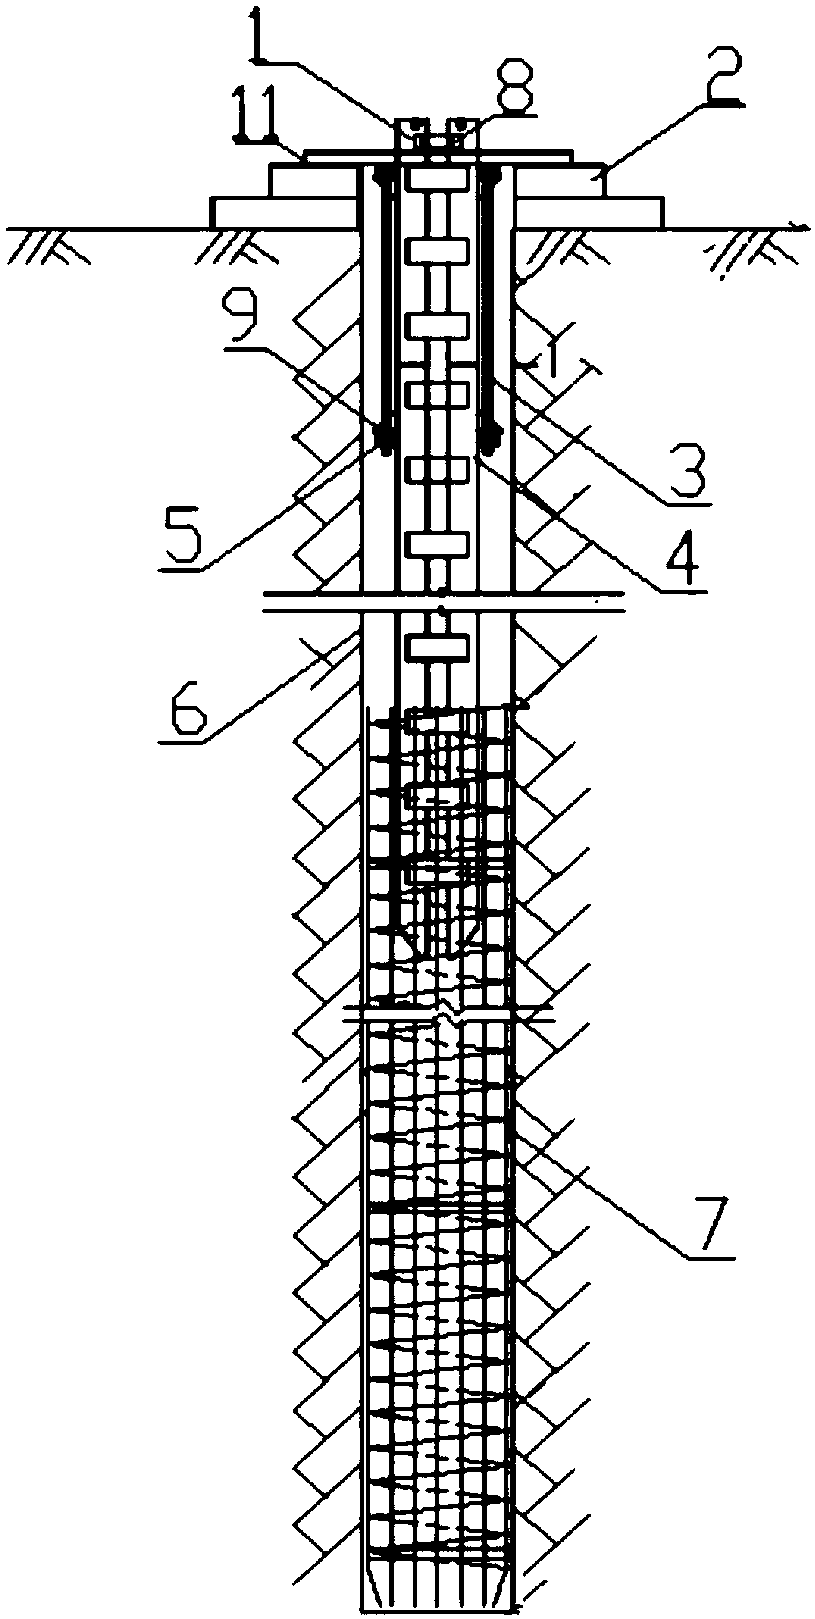 A method of using a positioning and steering control system for vertical lattice columns in deep foundation pit enclosure